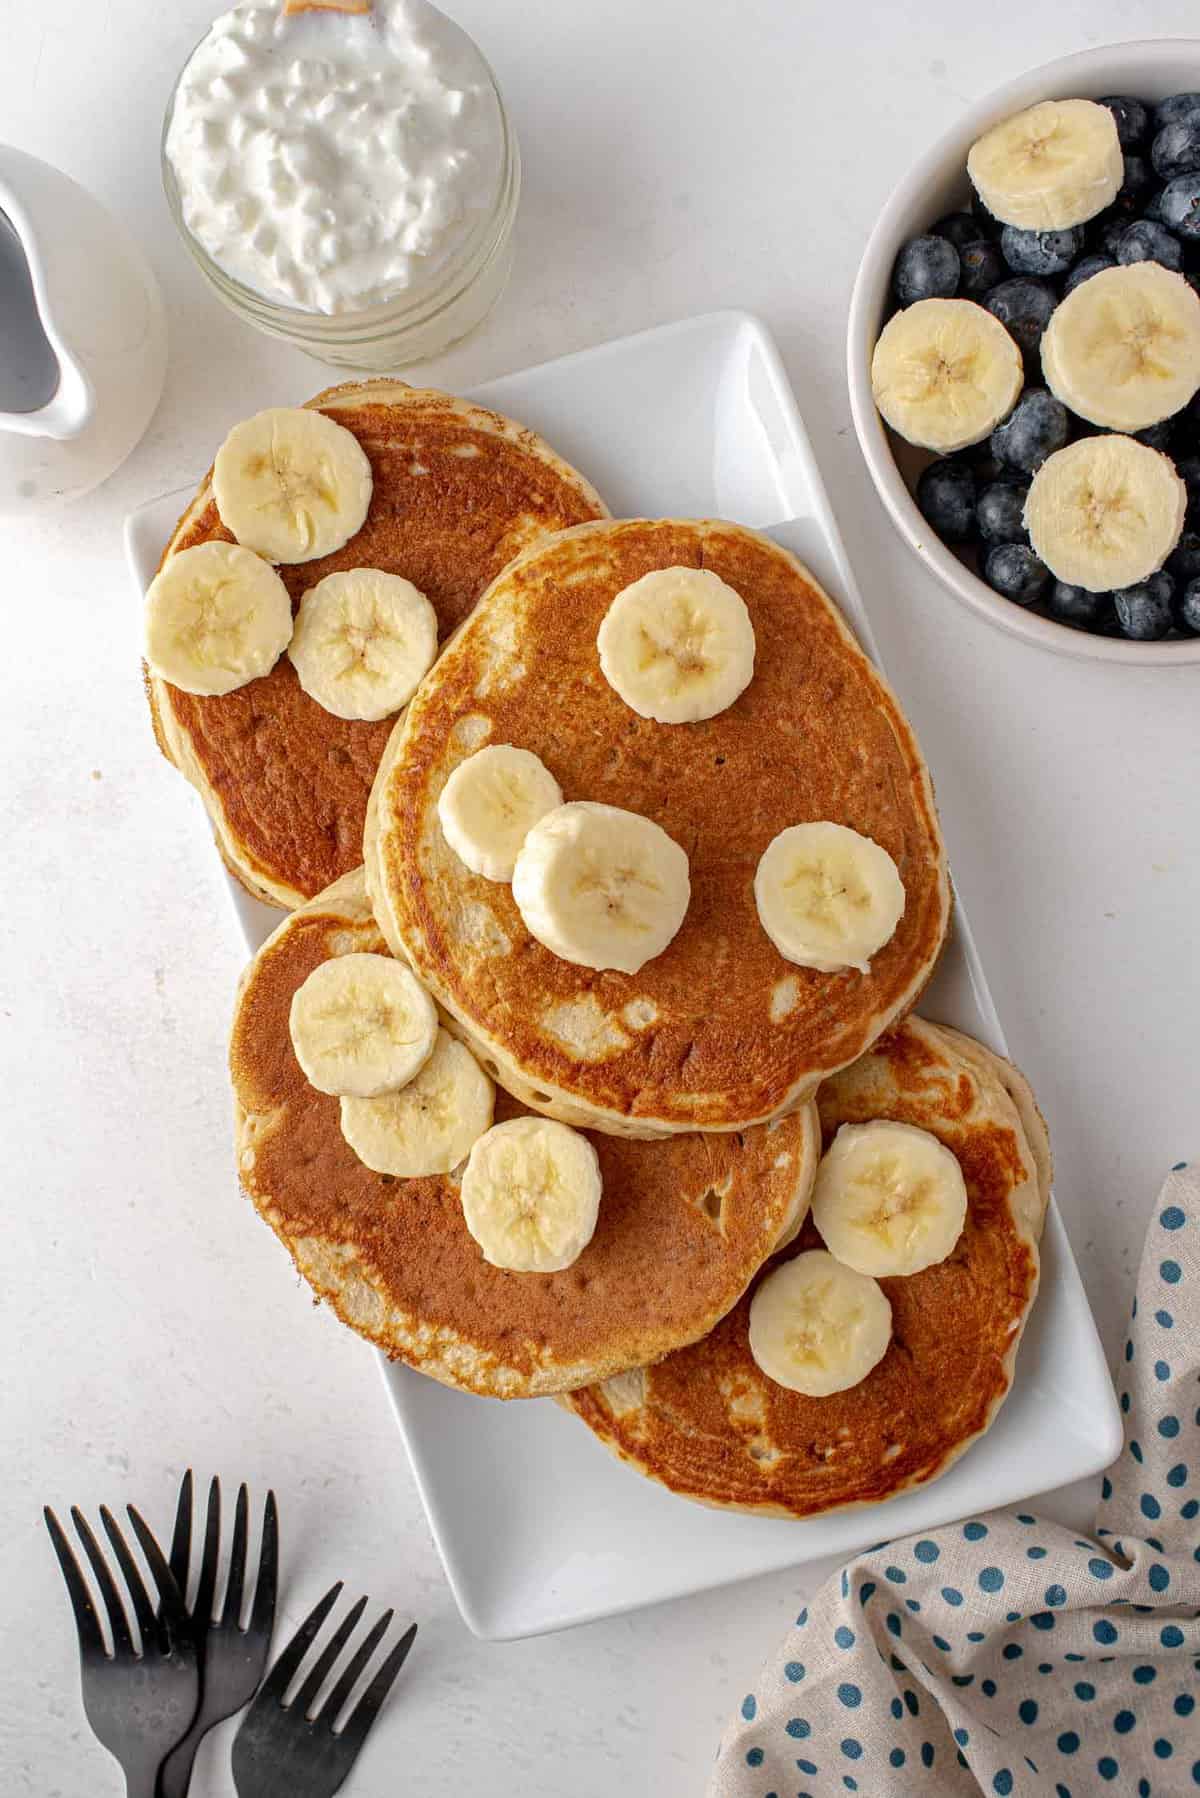 Pancakes on a platter with sliced bananas.